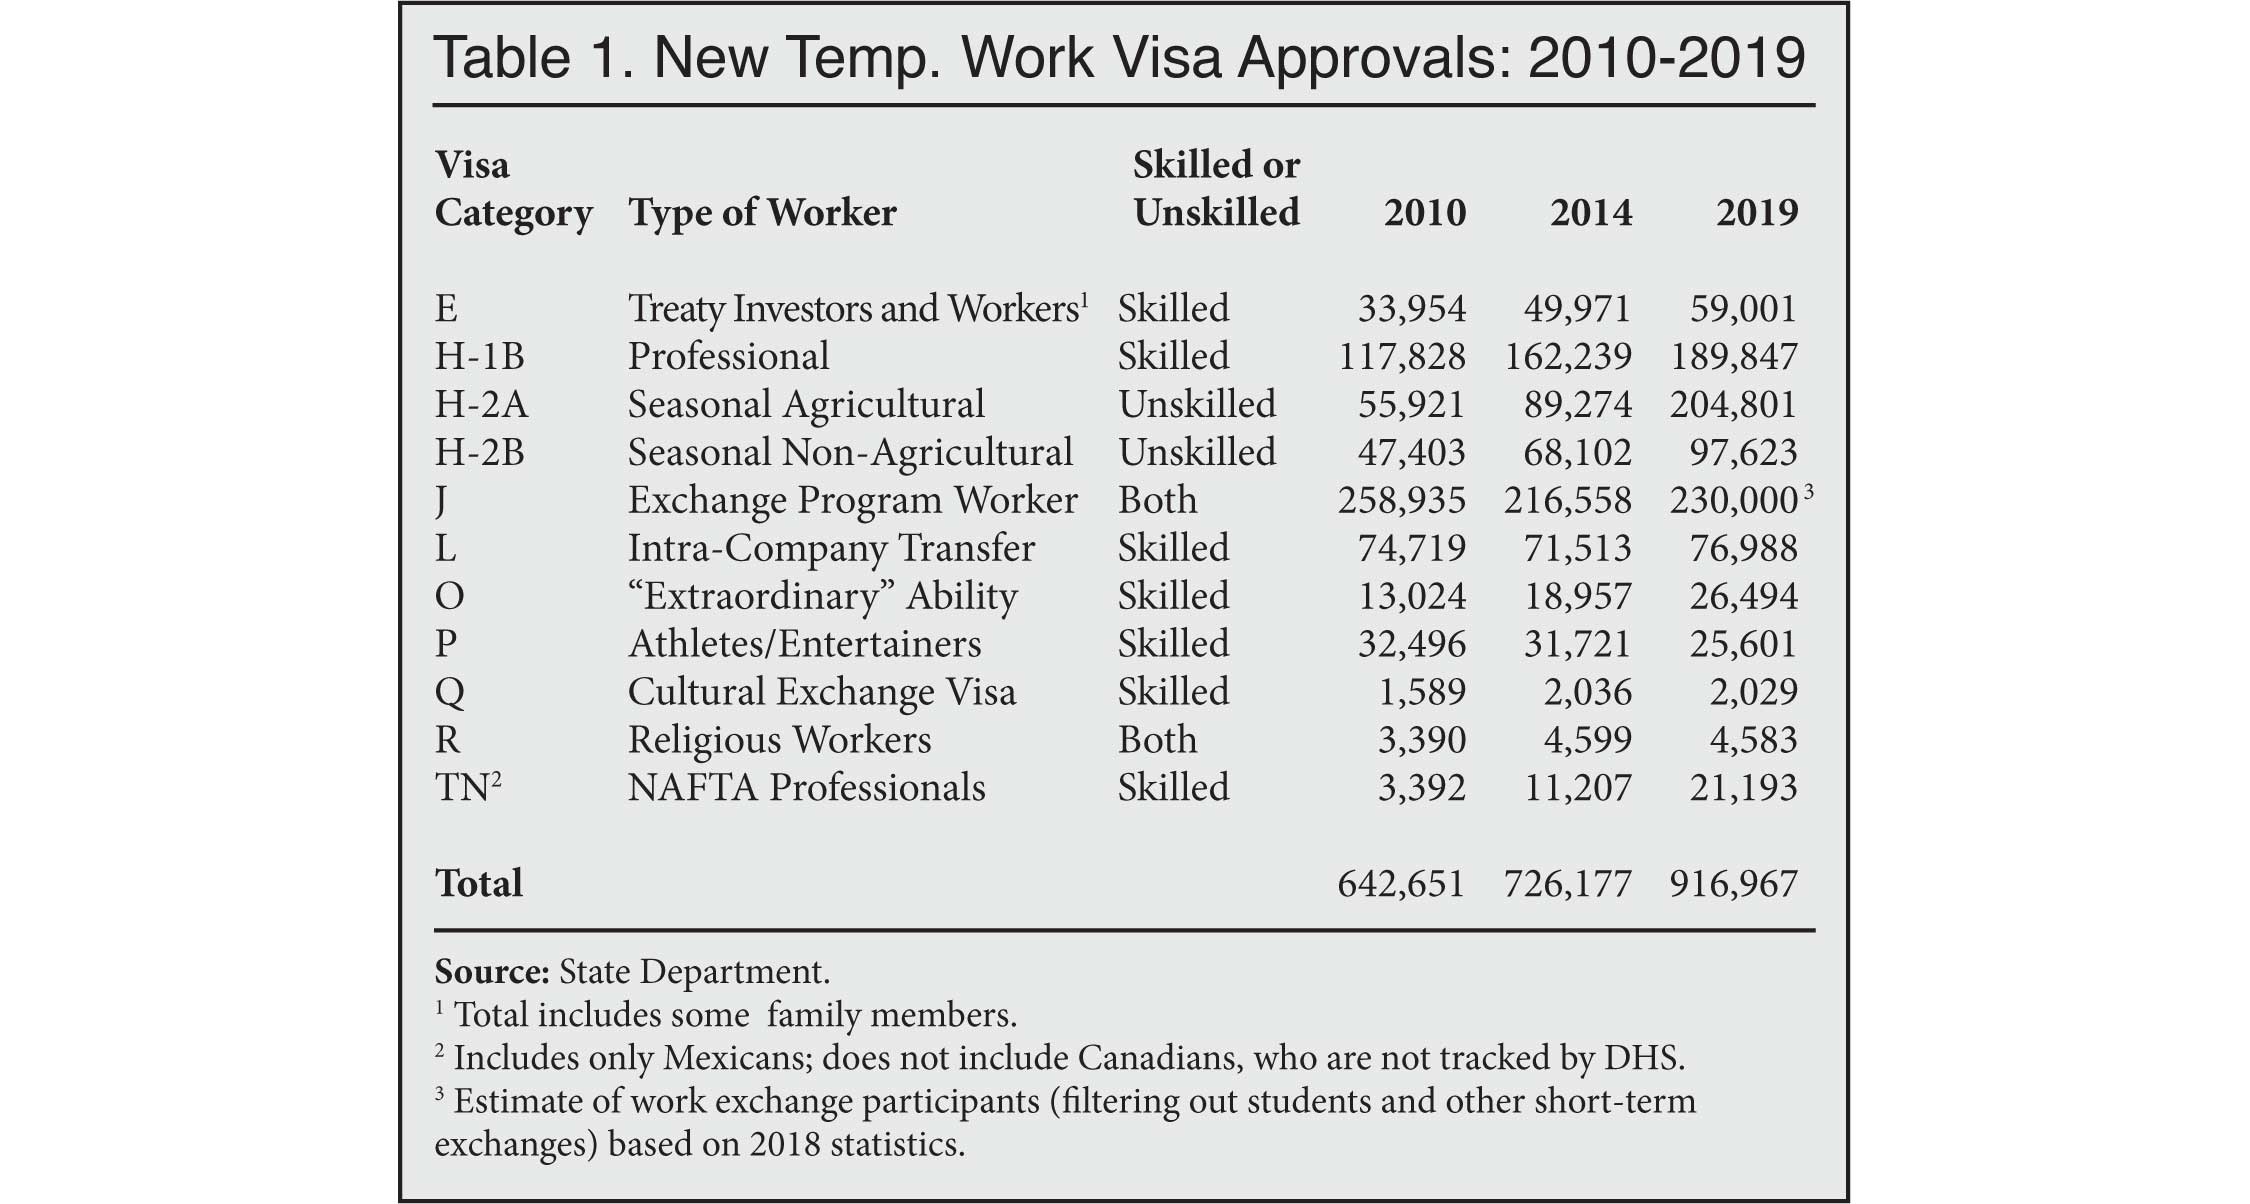 Table: New Temporary Work Visa Approvals, 2010 to 2019